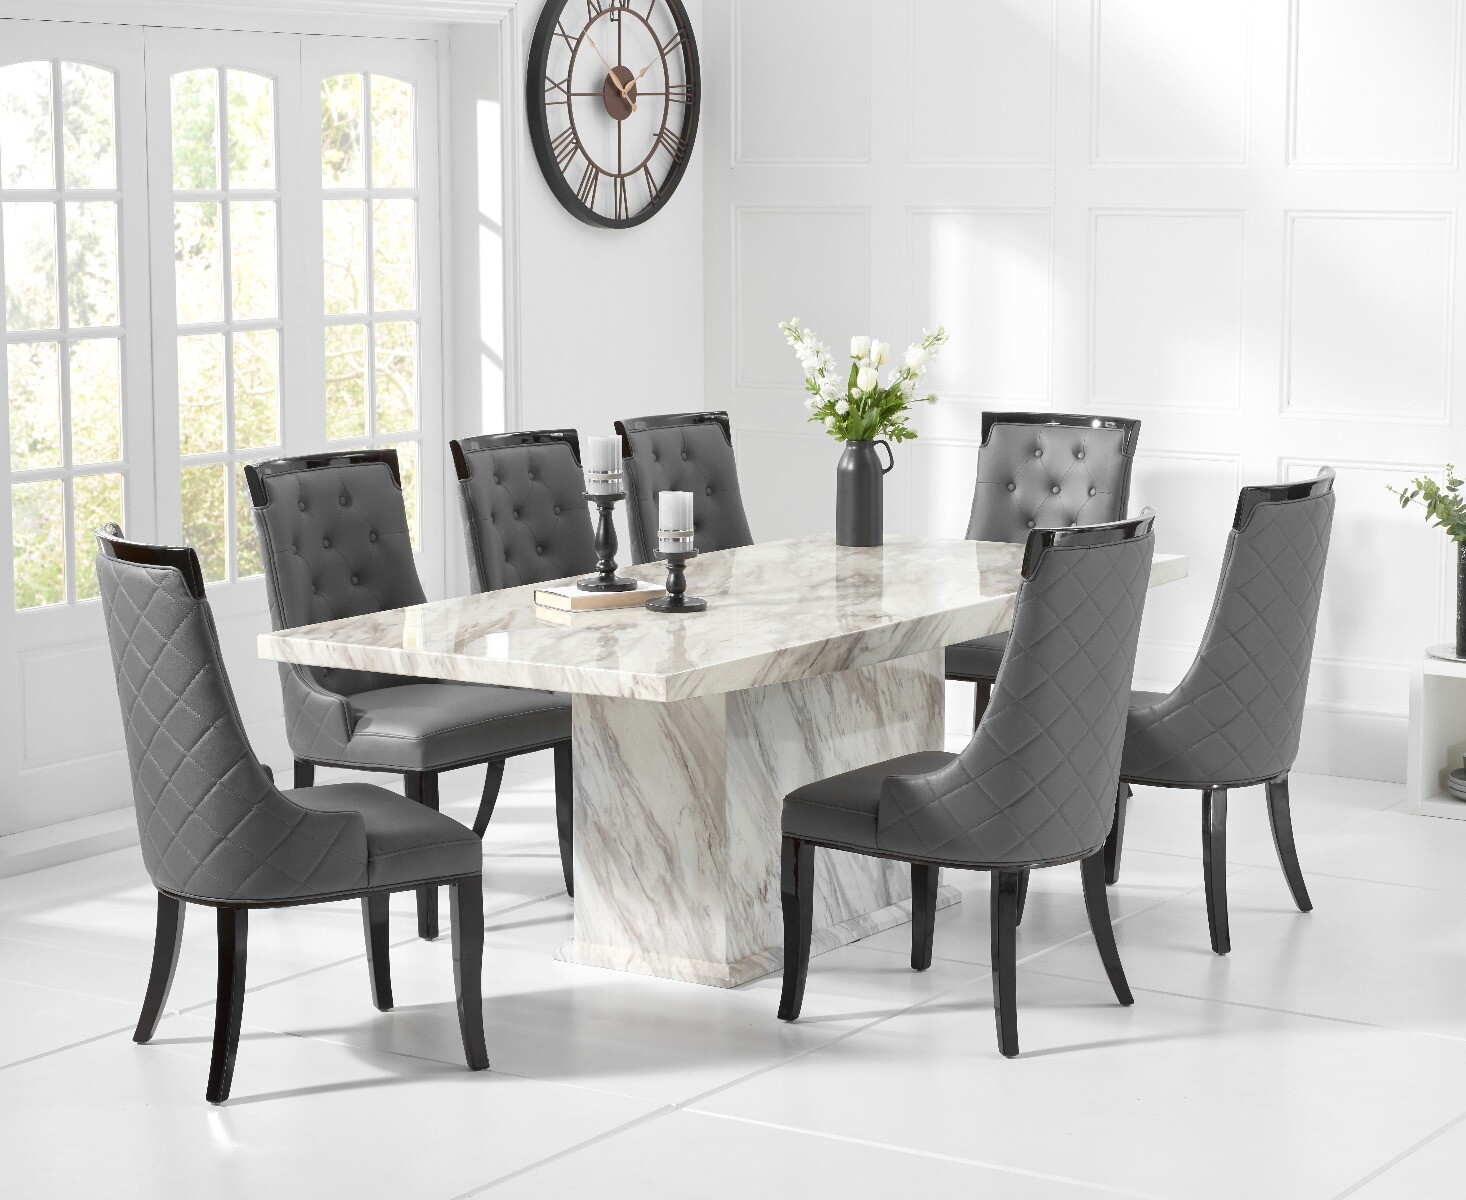 Calacatta 220cm Marbleeffect Dining Table With 12 Cream Francesca Chairs